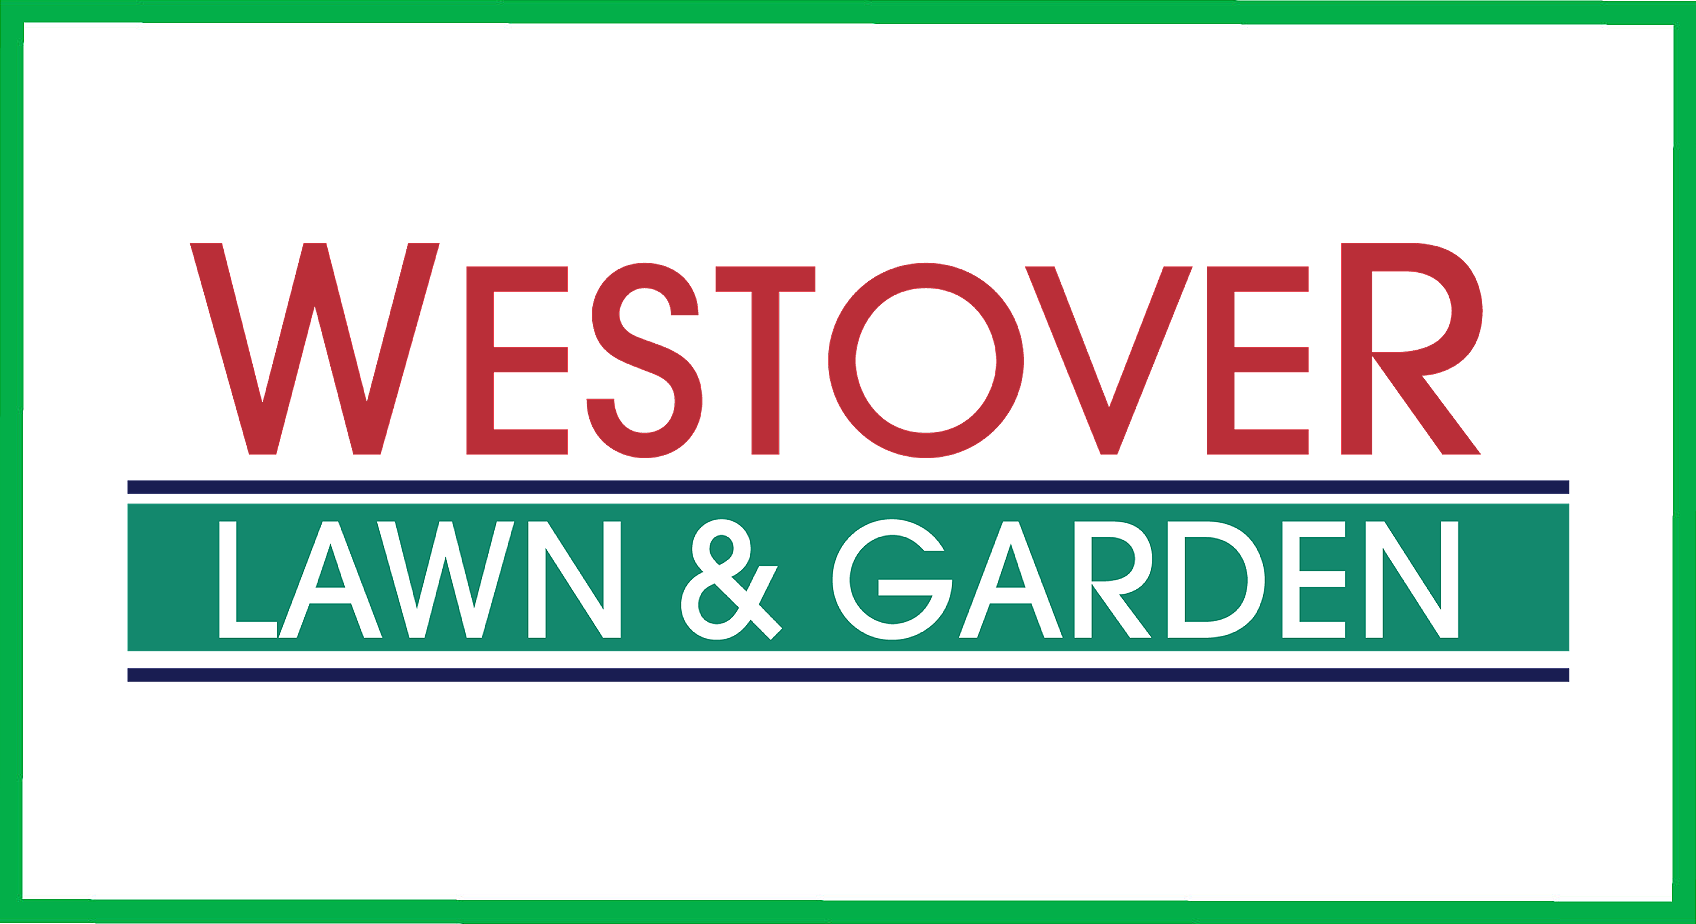 A picture of the westover lawn and garden logo.